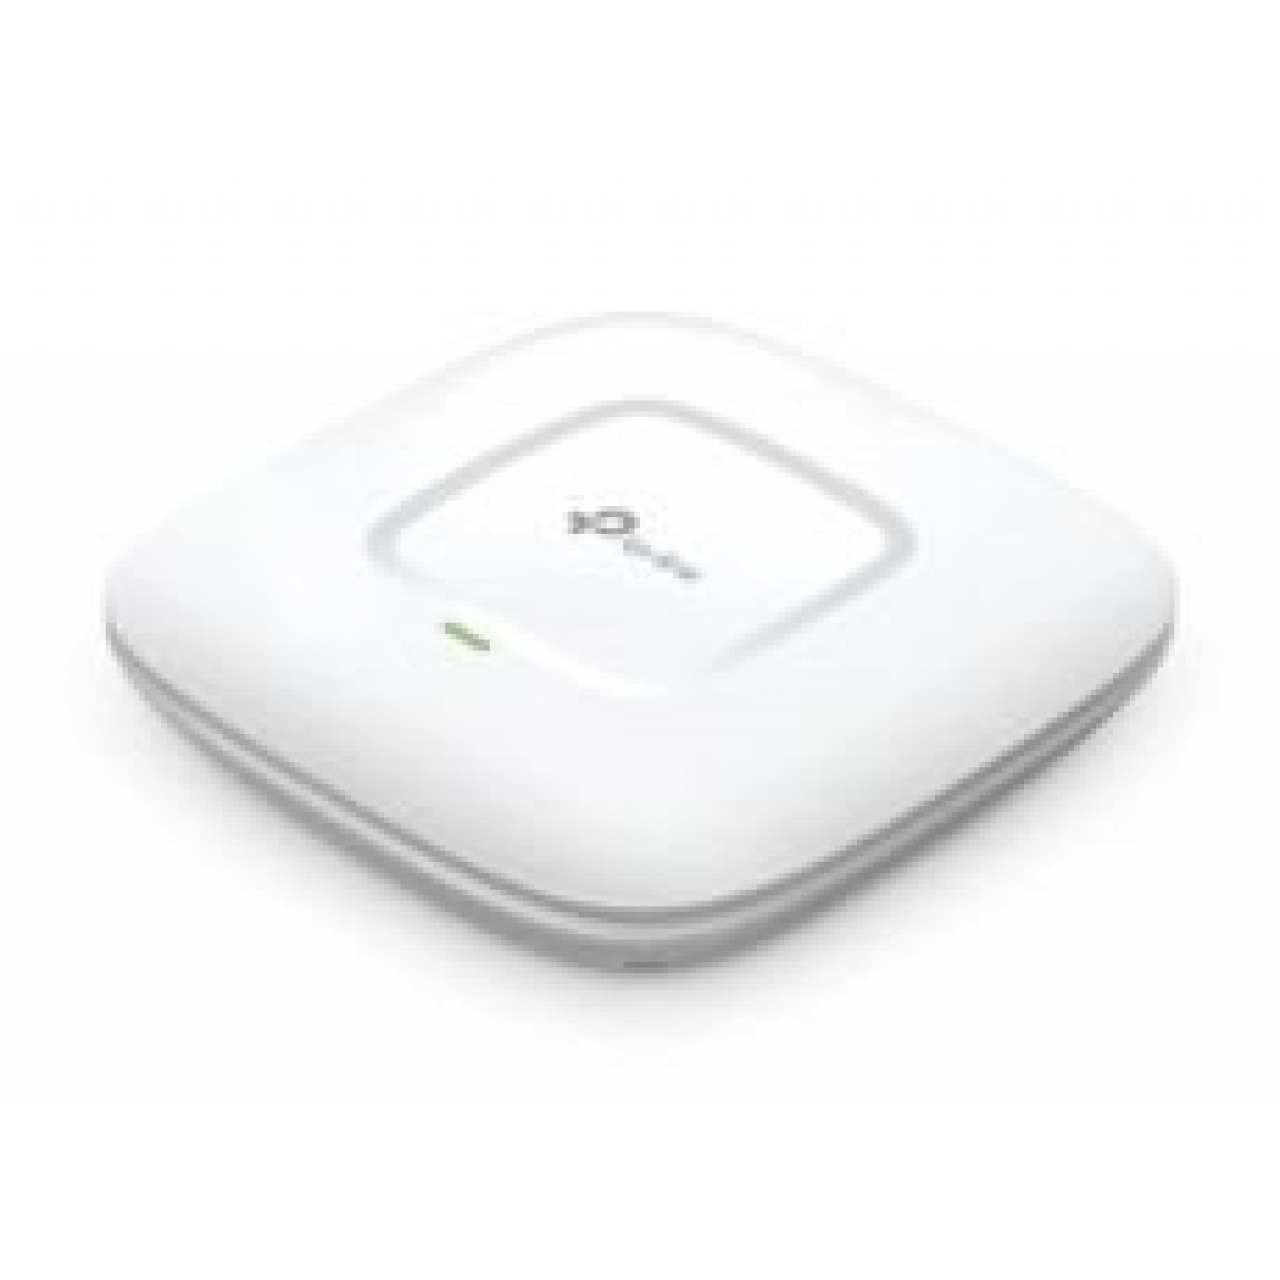 TP-LINK 300MBPS WIRELESS N GİGABİT ACCESS POINT